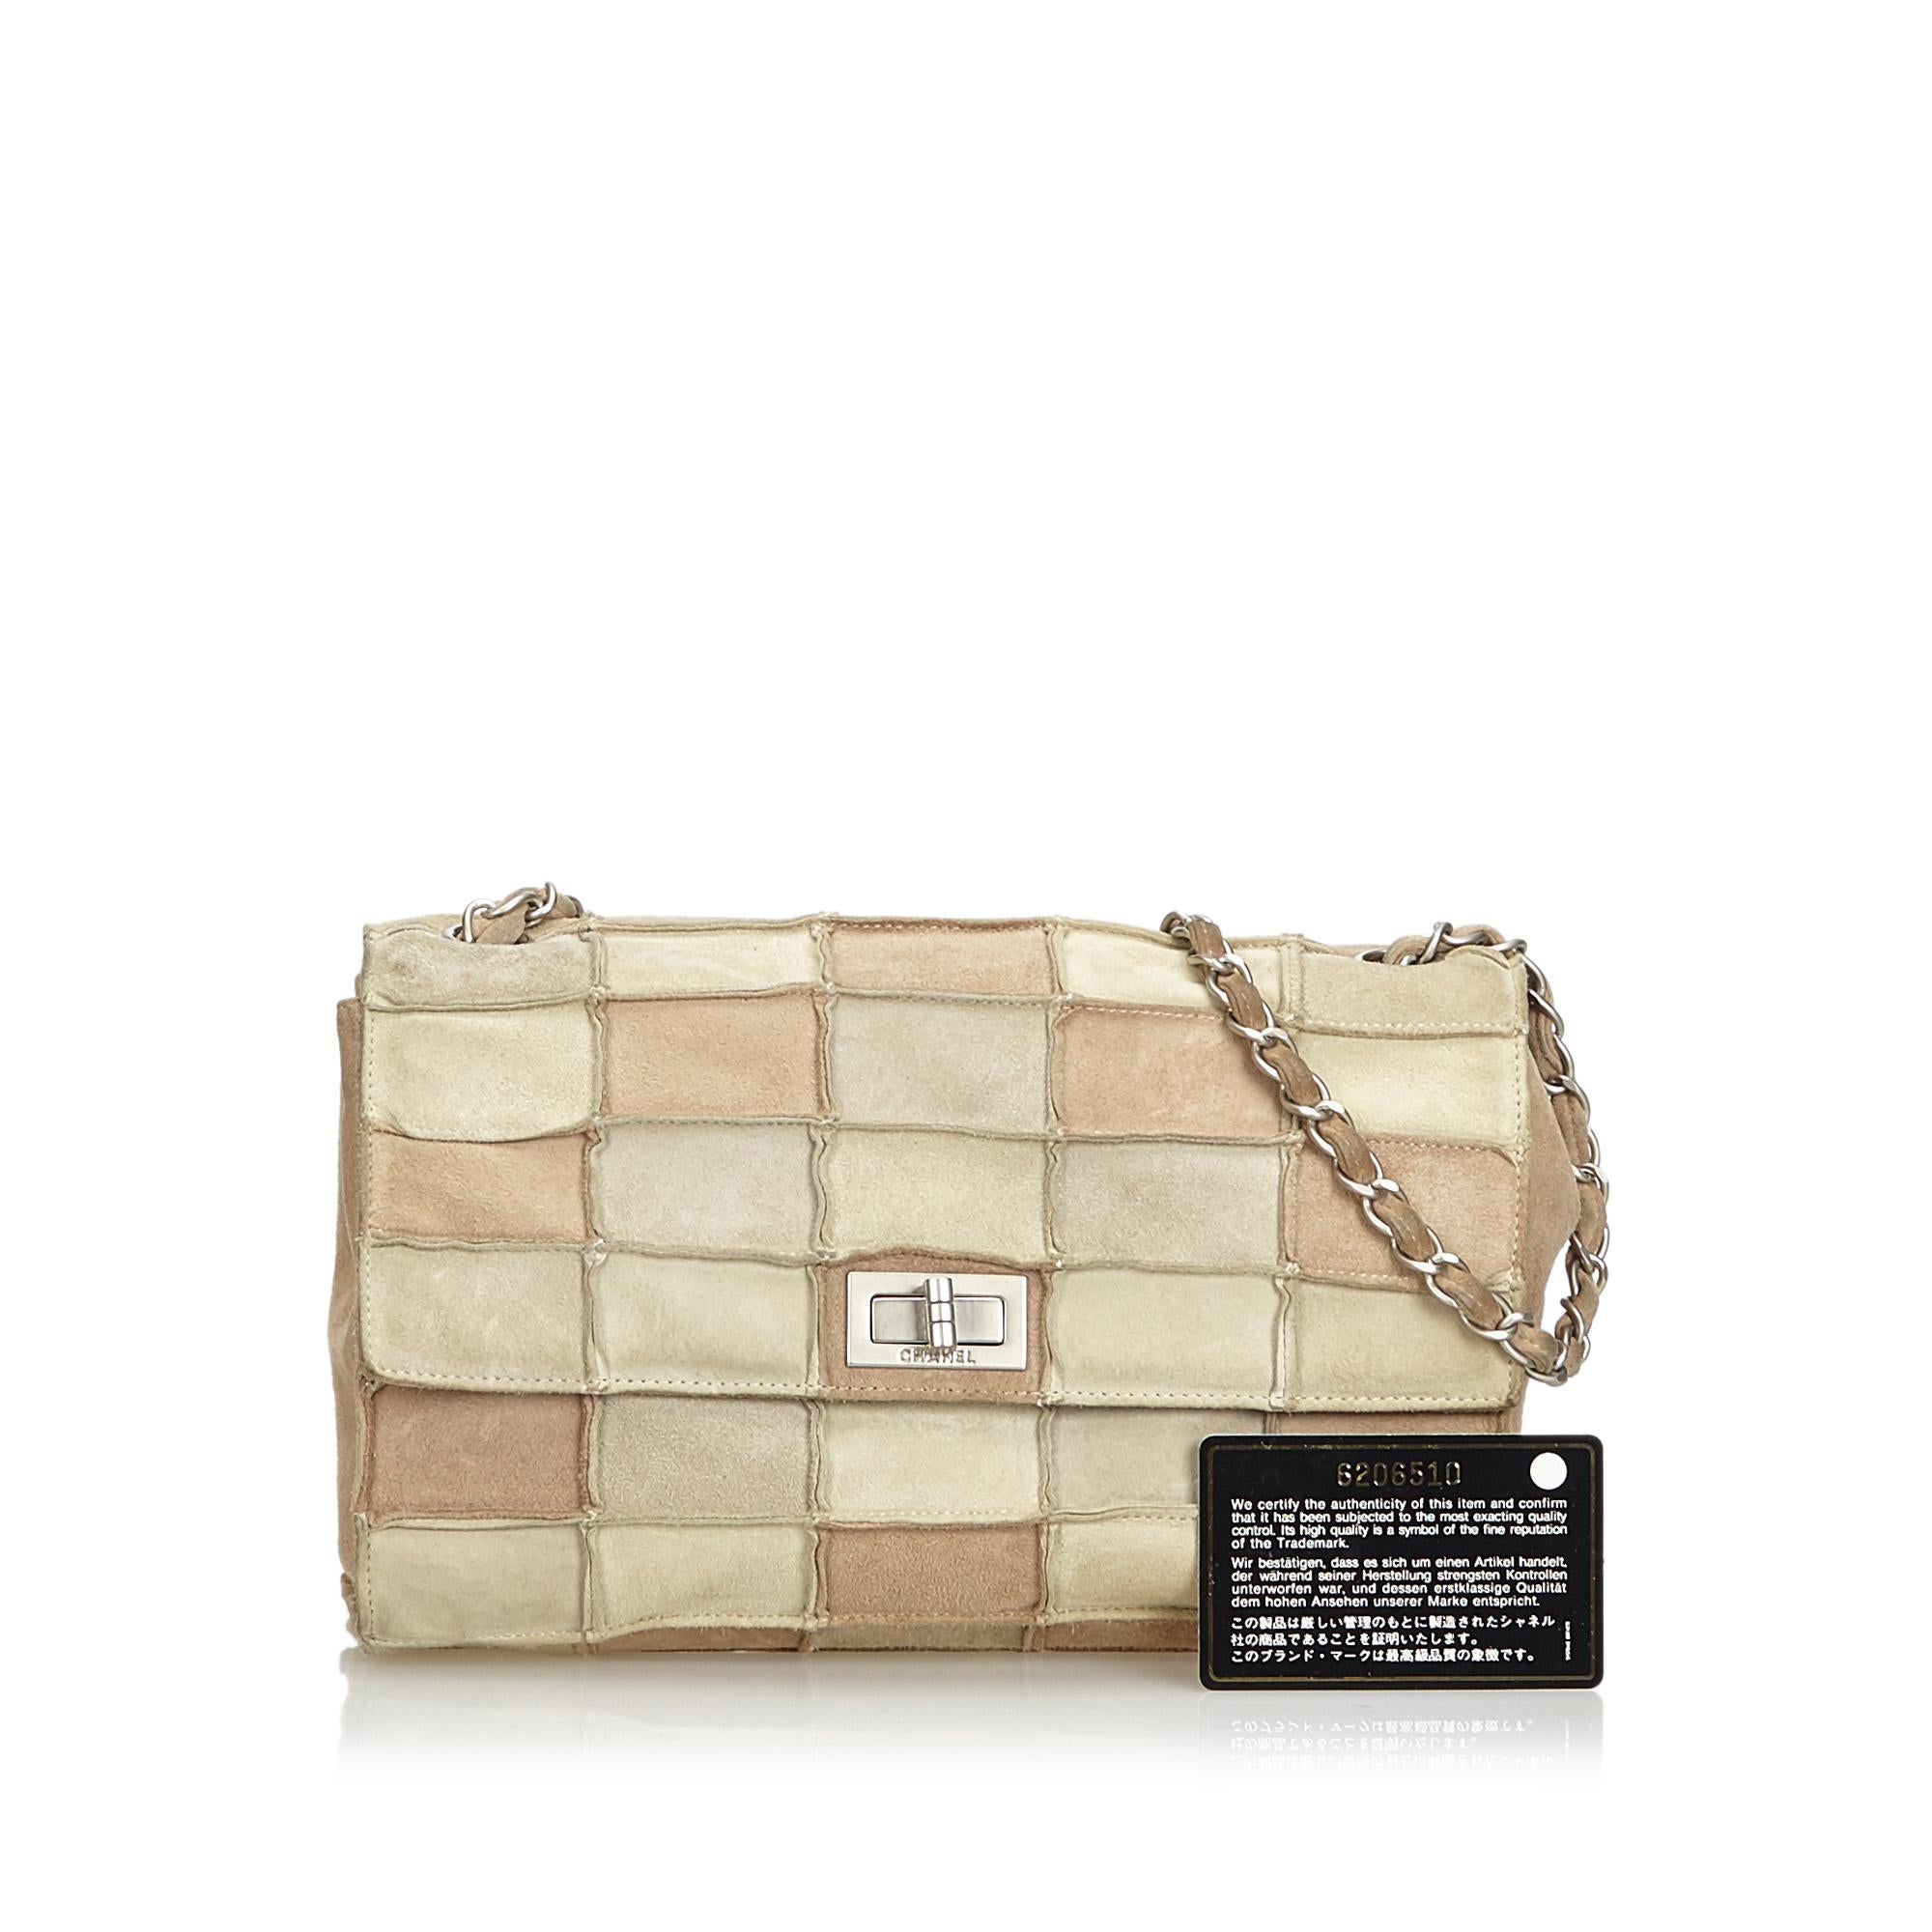 Chanel Brown Reissue Patchwork Flap Bag 10